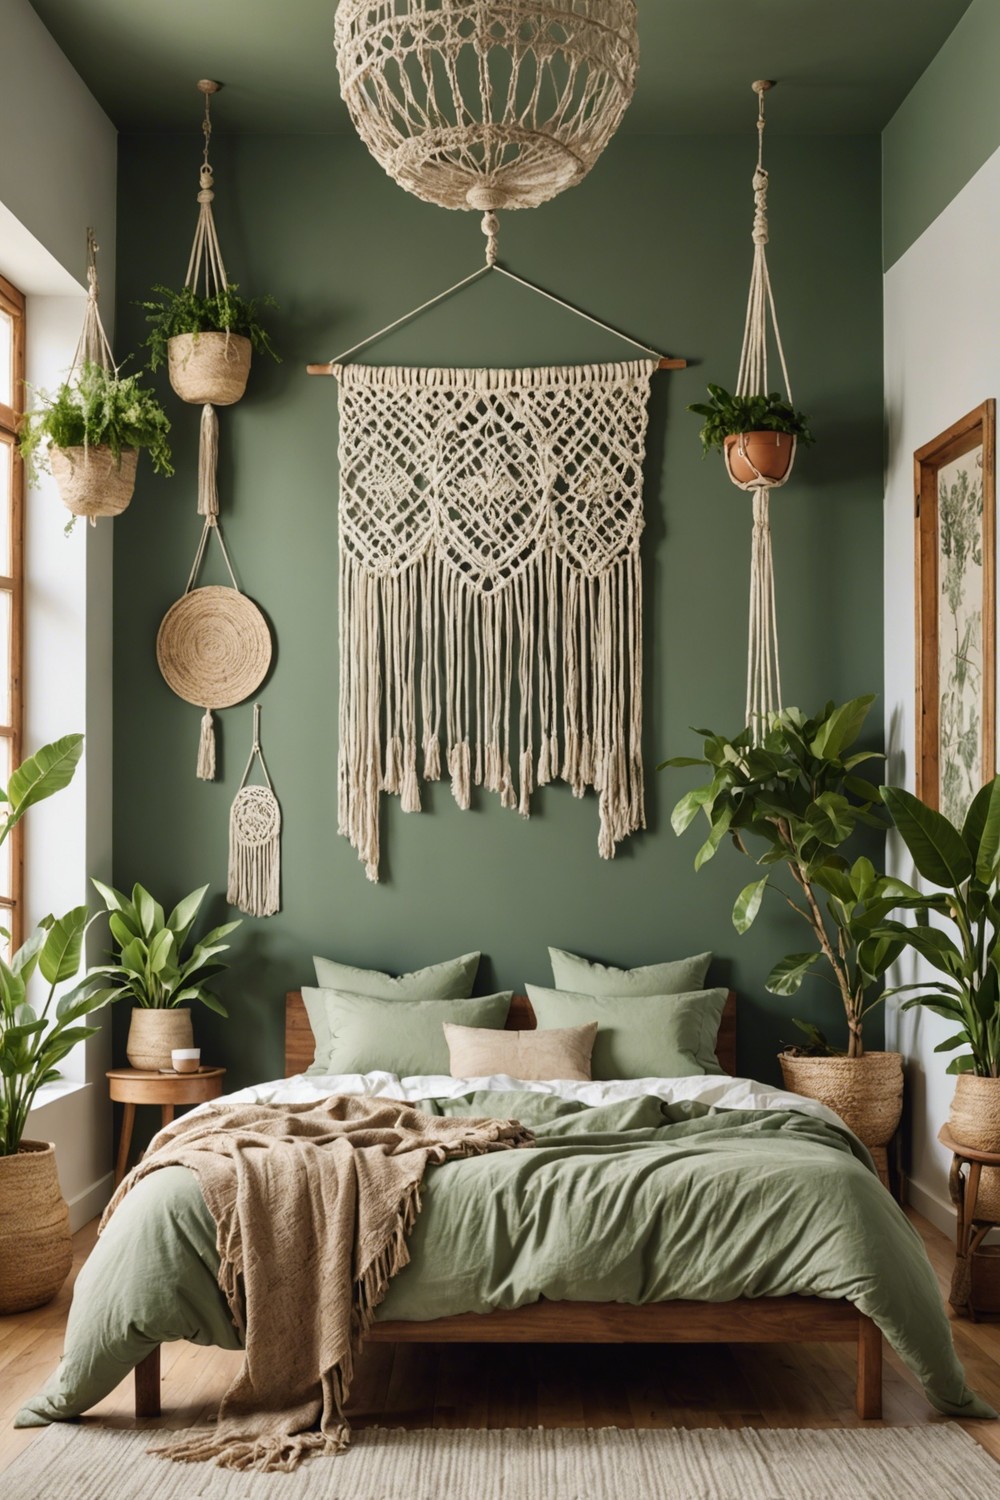 Use Sage Green as a Soothing Ceiling Color